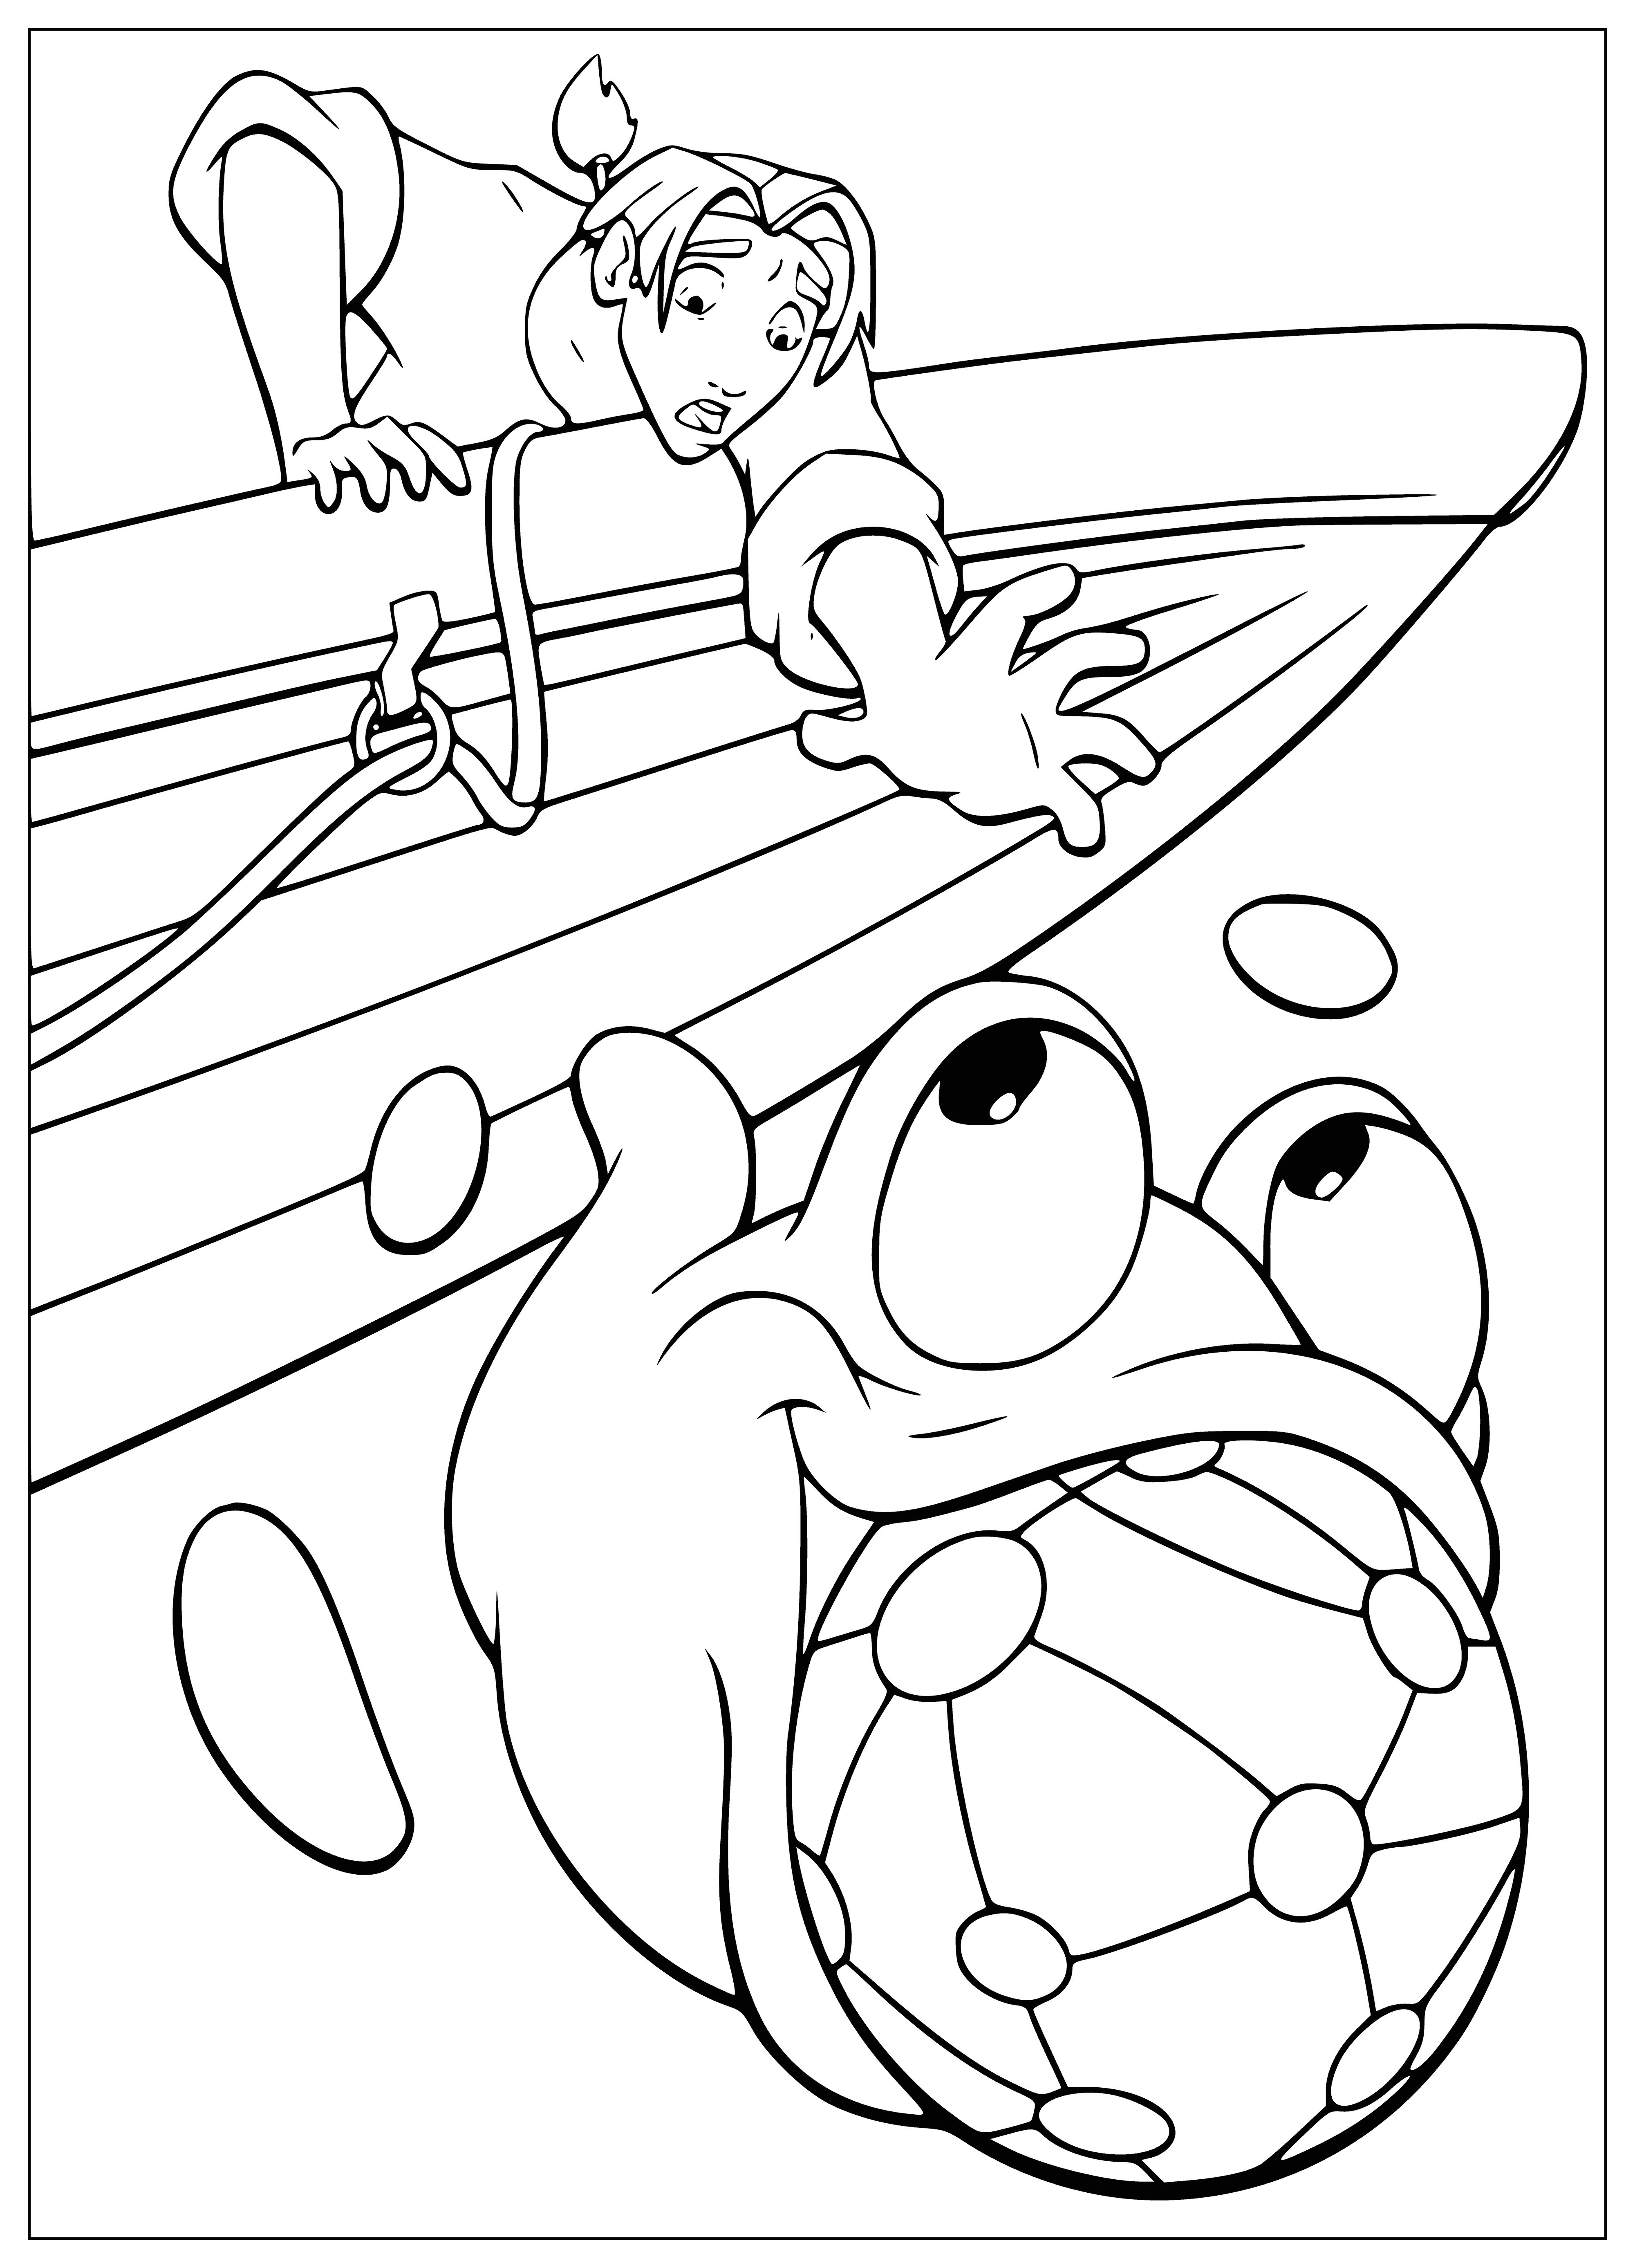 Morph plays with the card coloring page